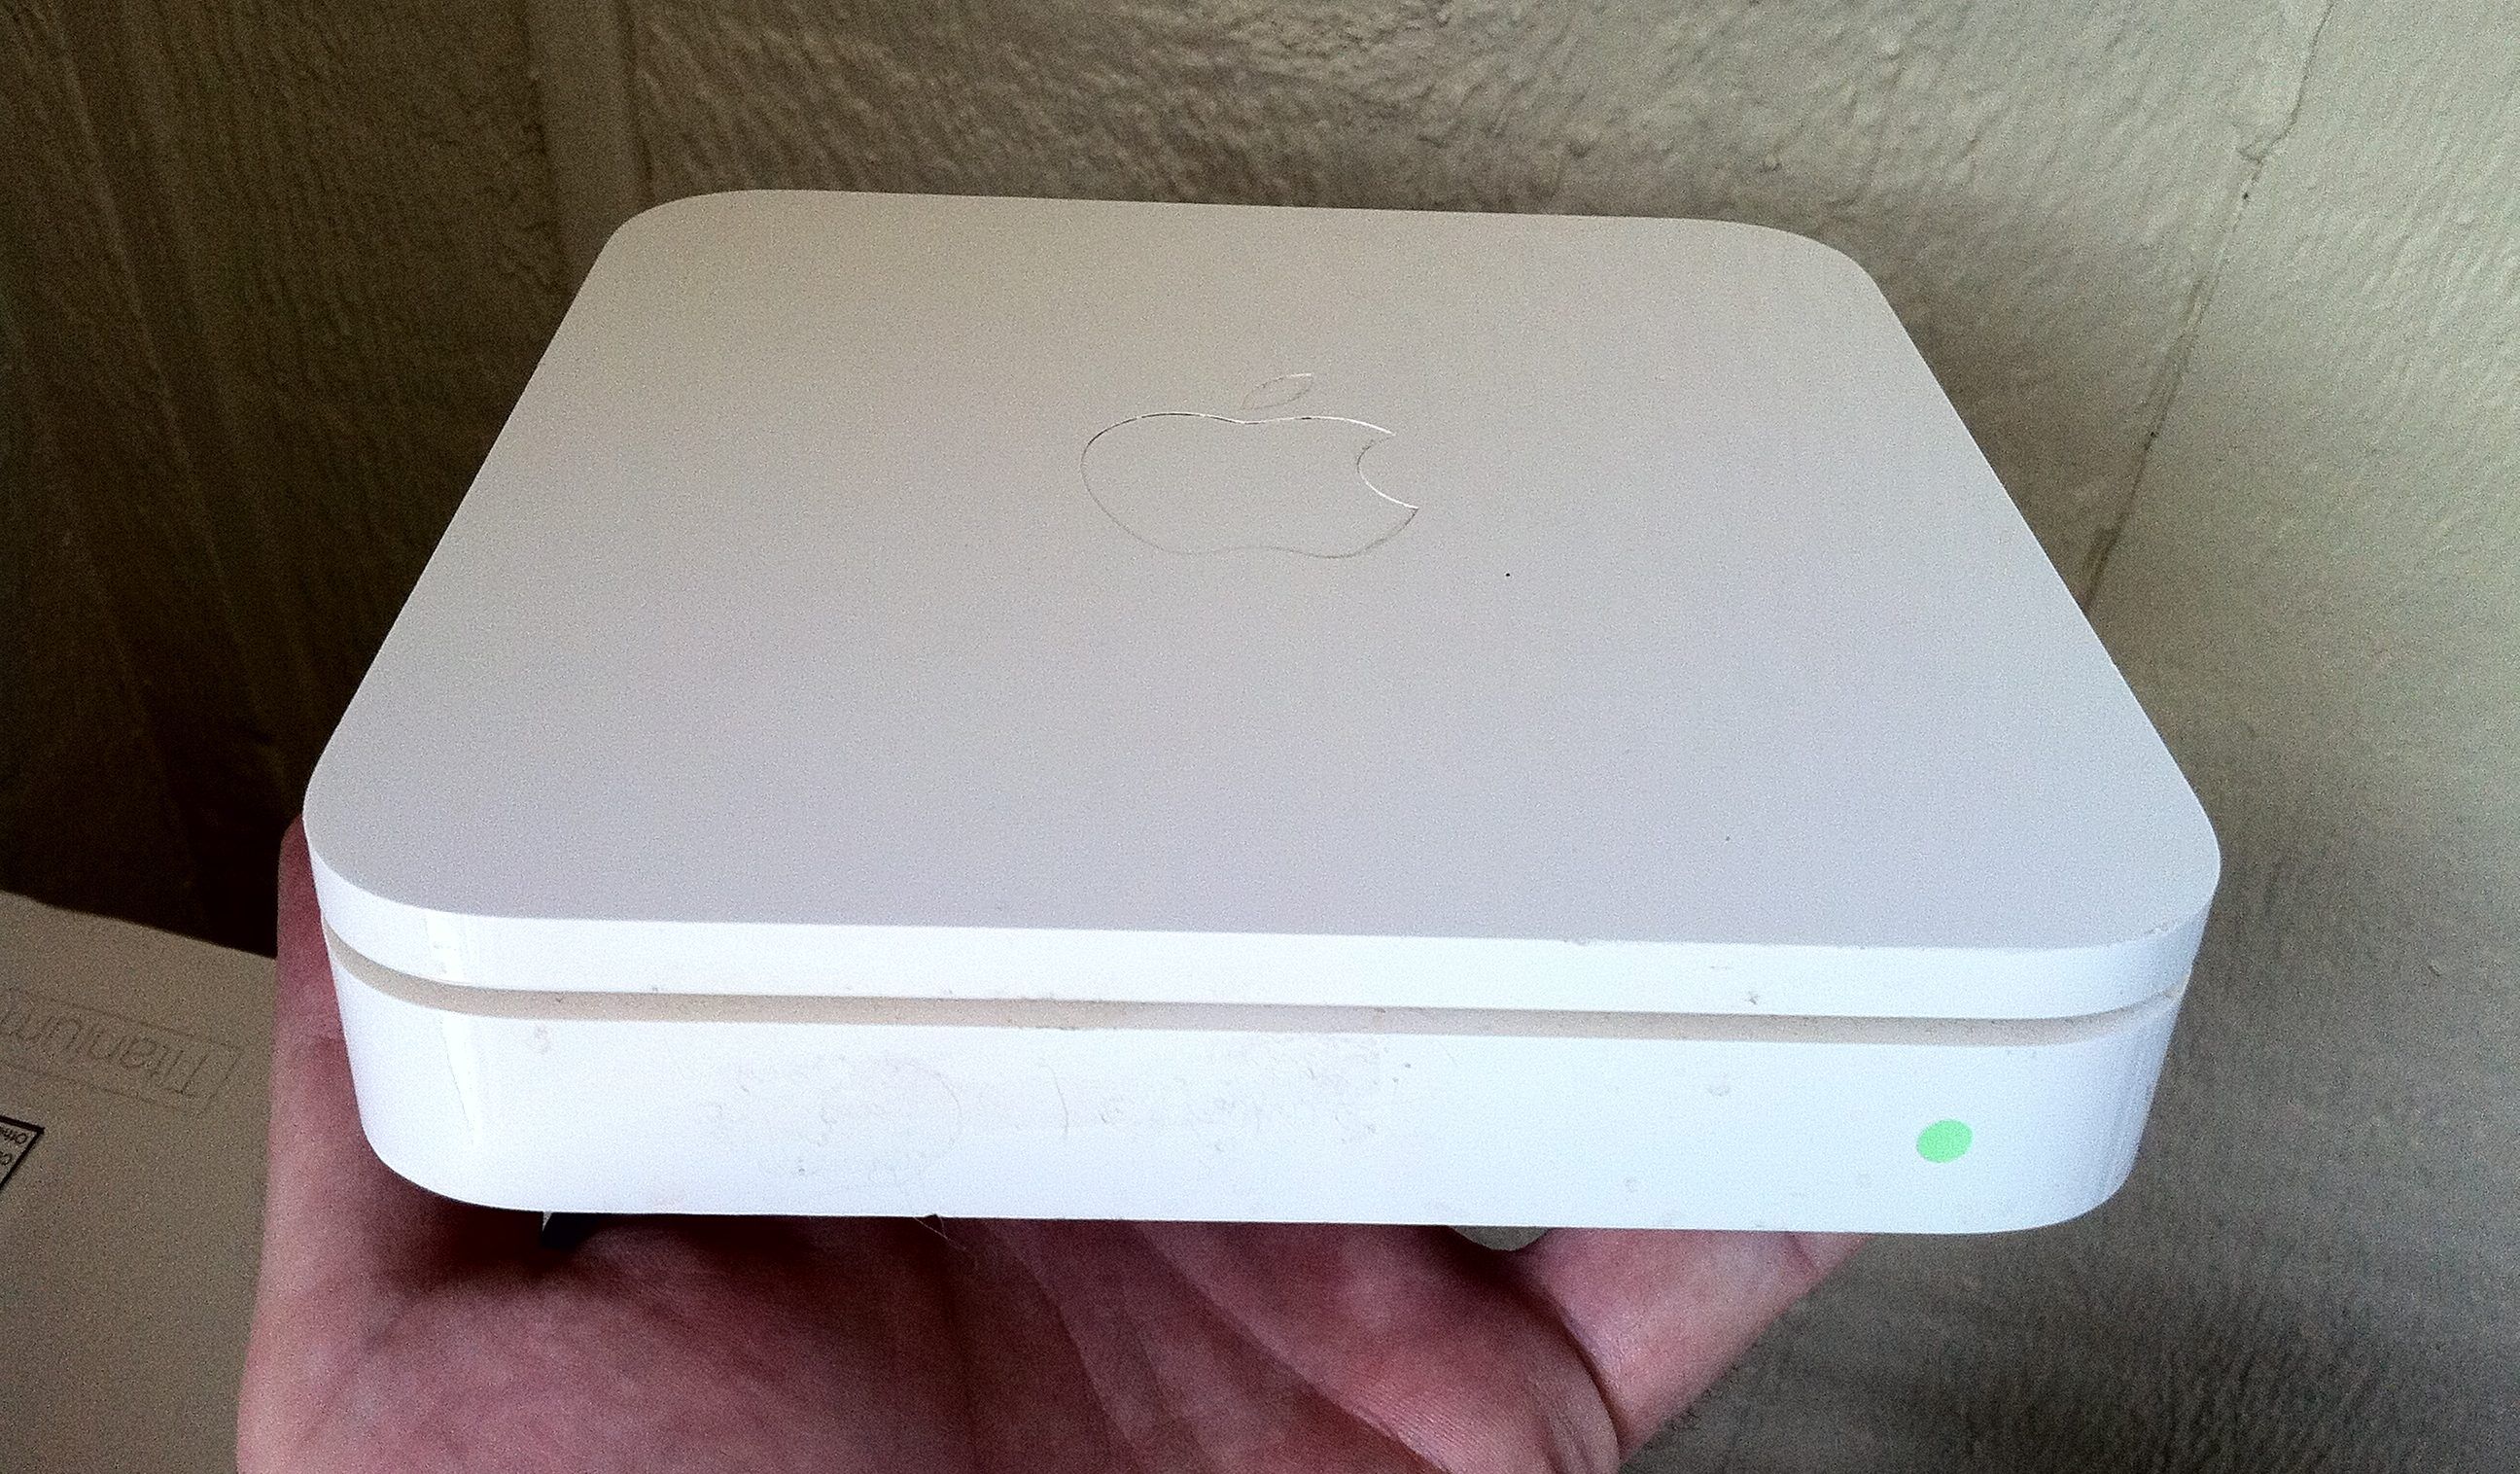 The square model of an AirPort Extreme is held up by a hand